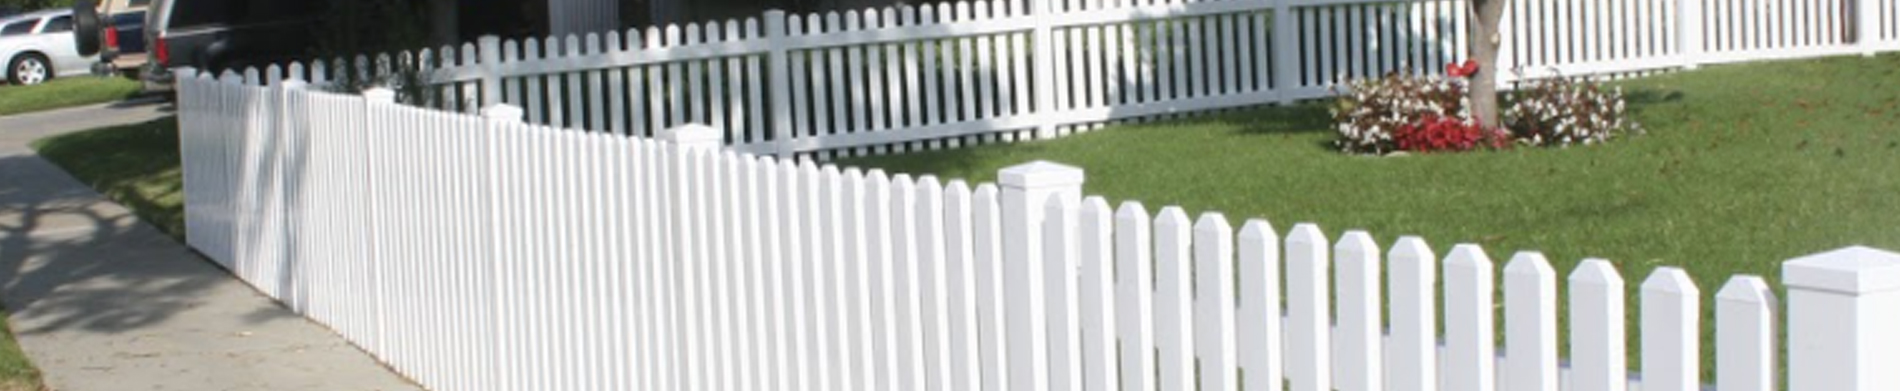 Install a vinyl fence and secure your front yard and install a wall topper over your boundary walls